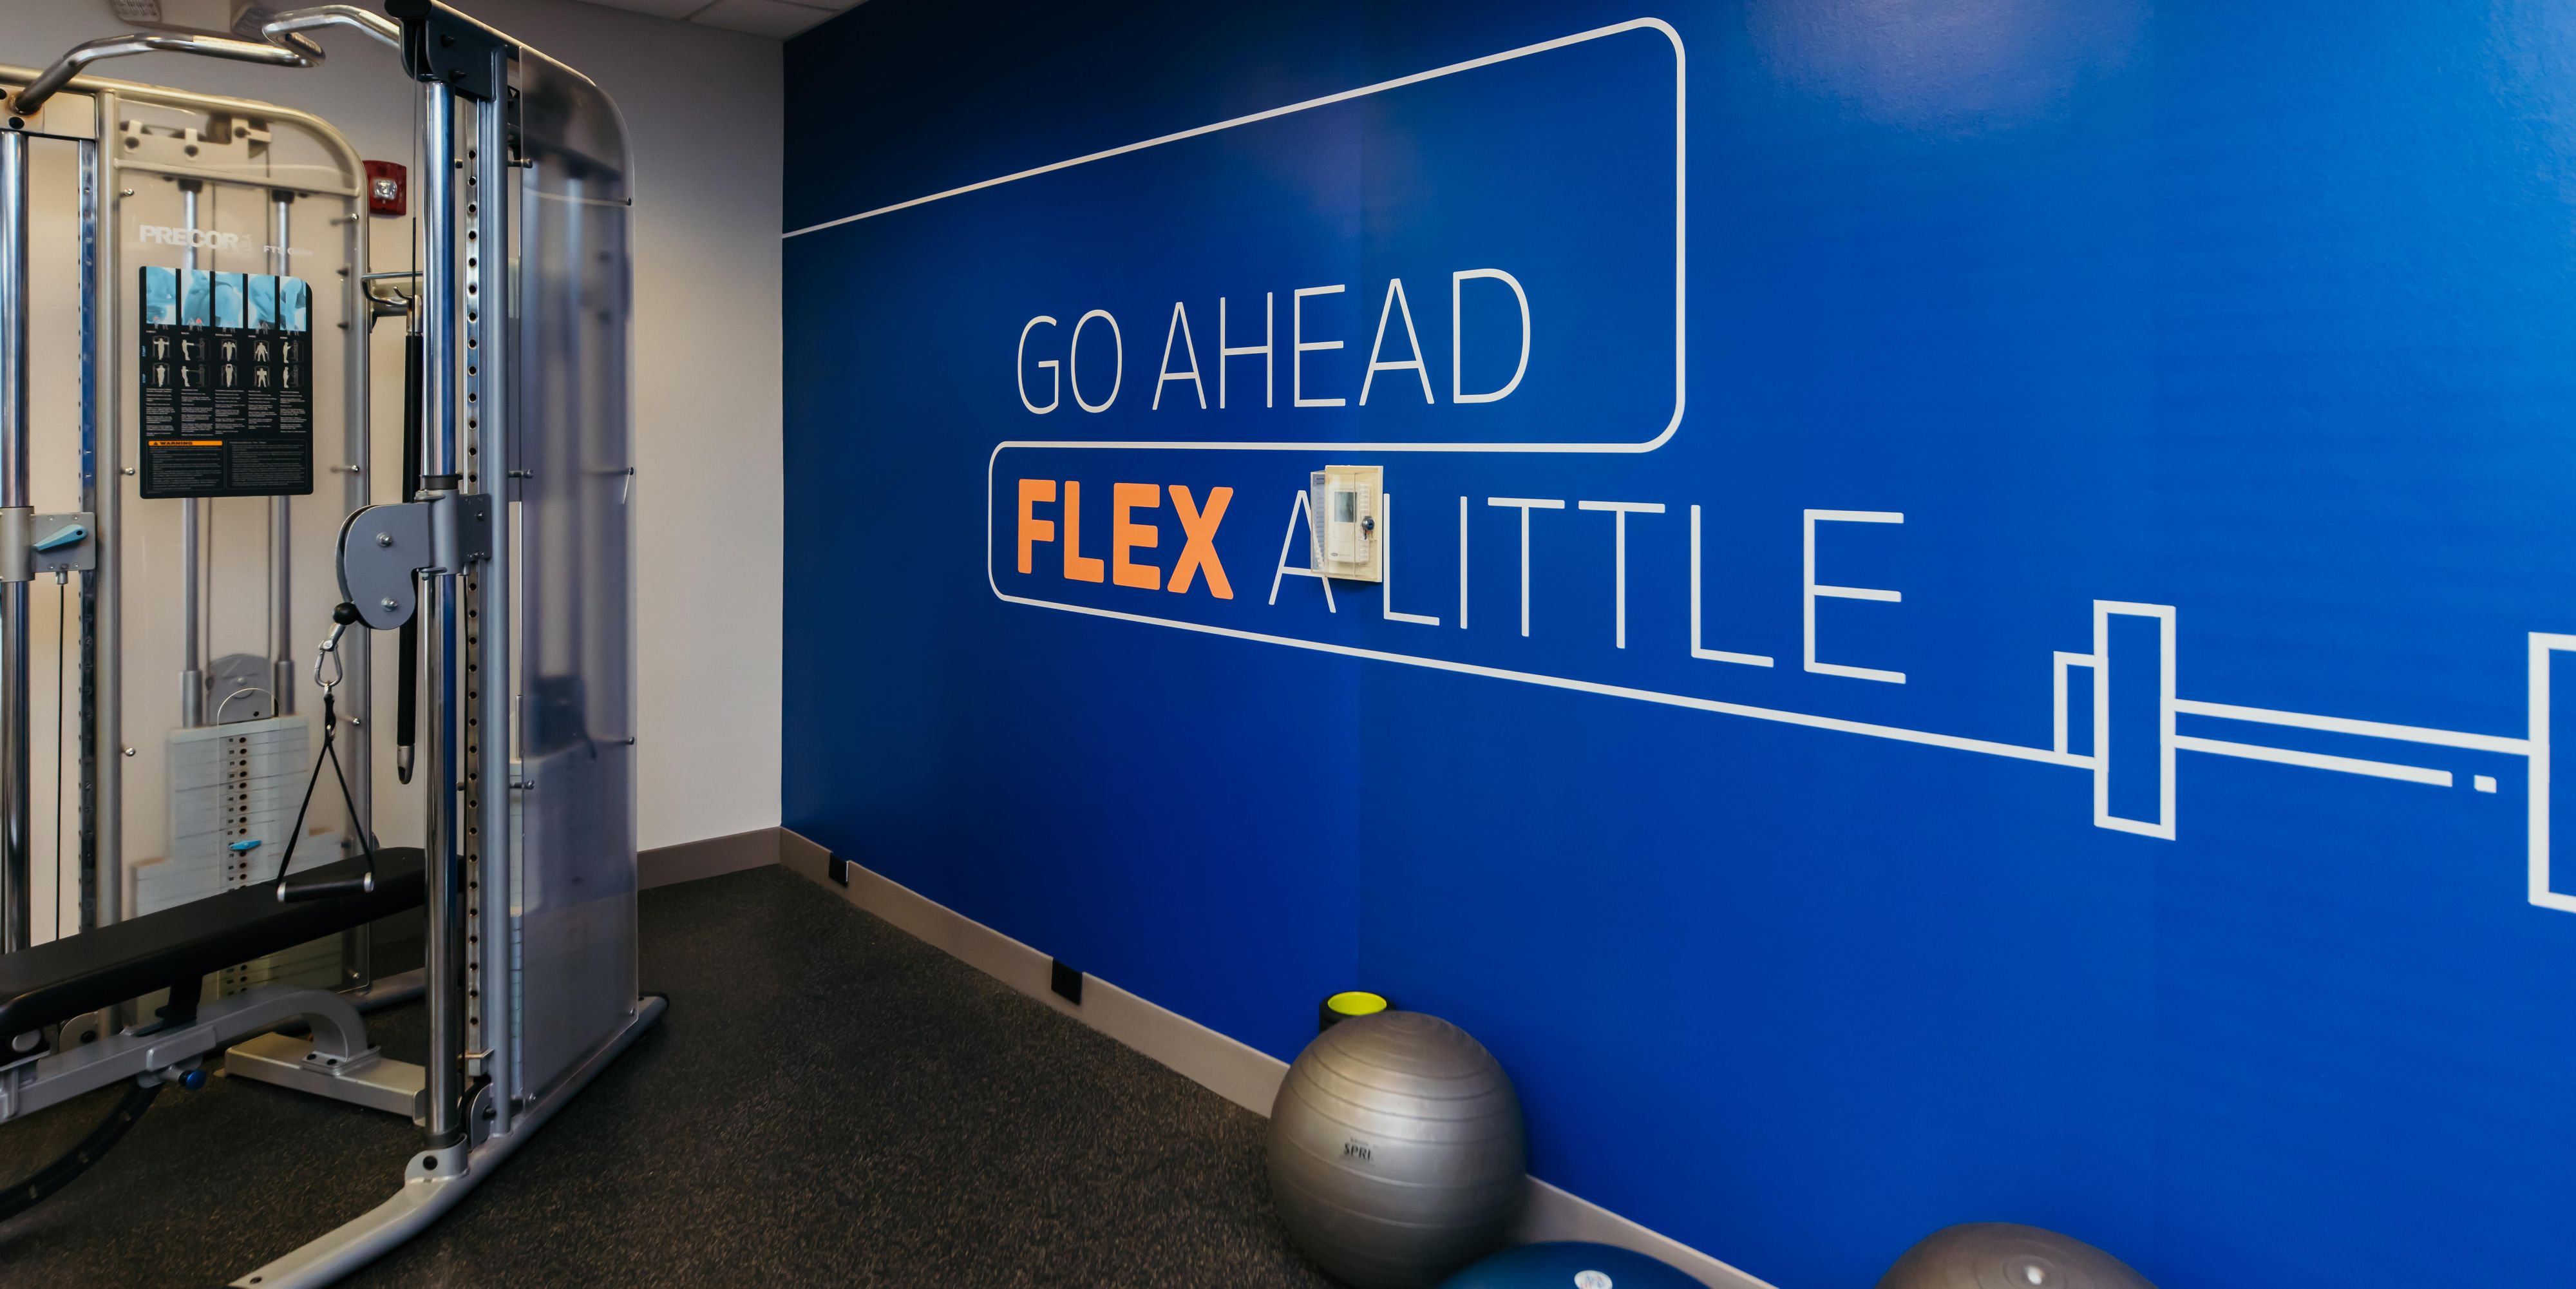 Take advantage of our well equipped, on-site fitness center and stay fit and active, even when you're on the road. 